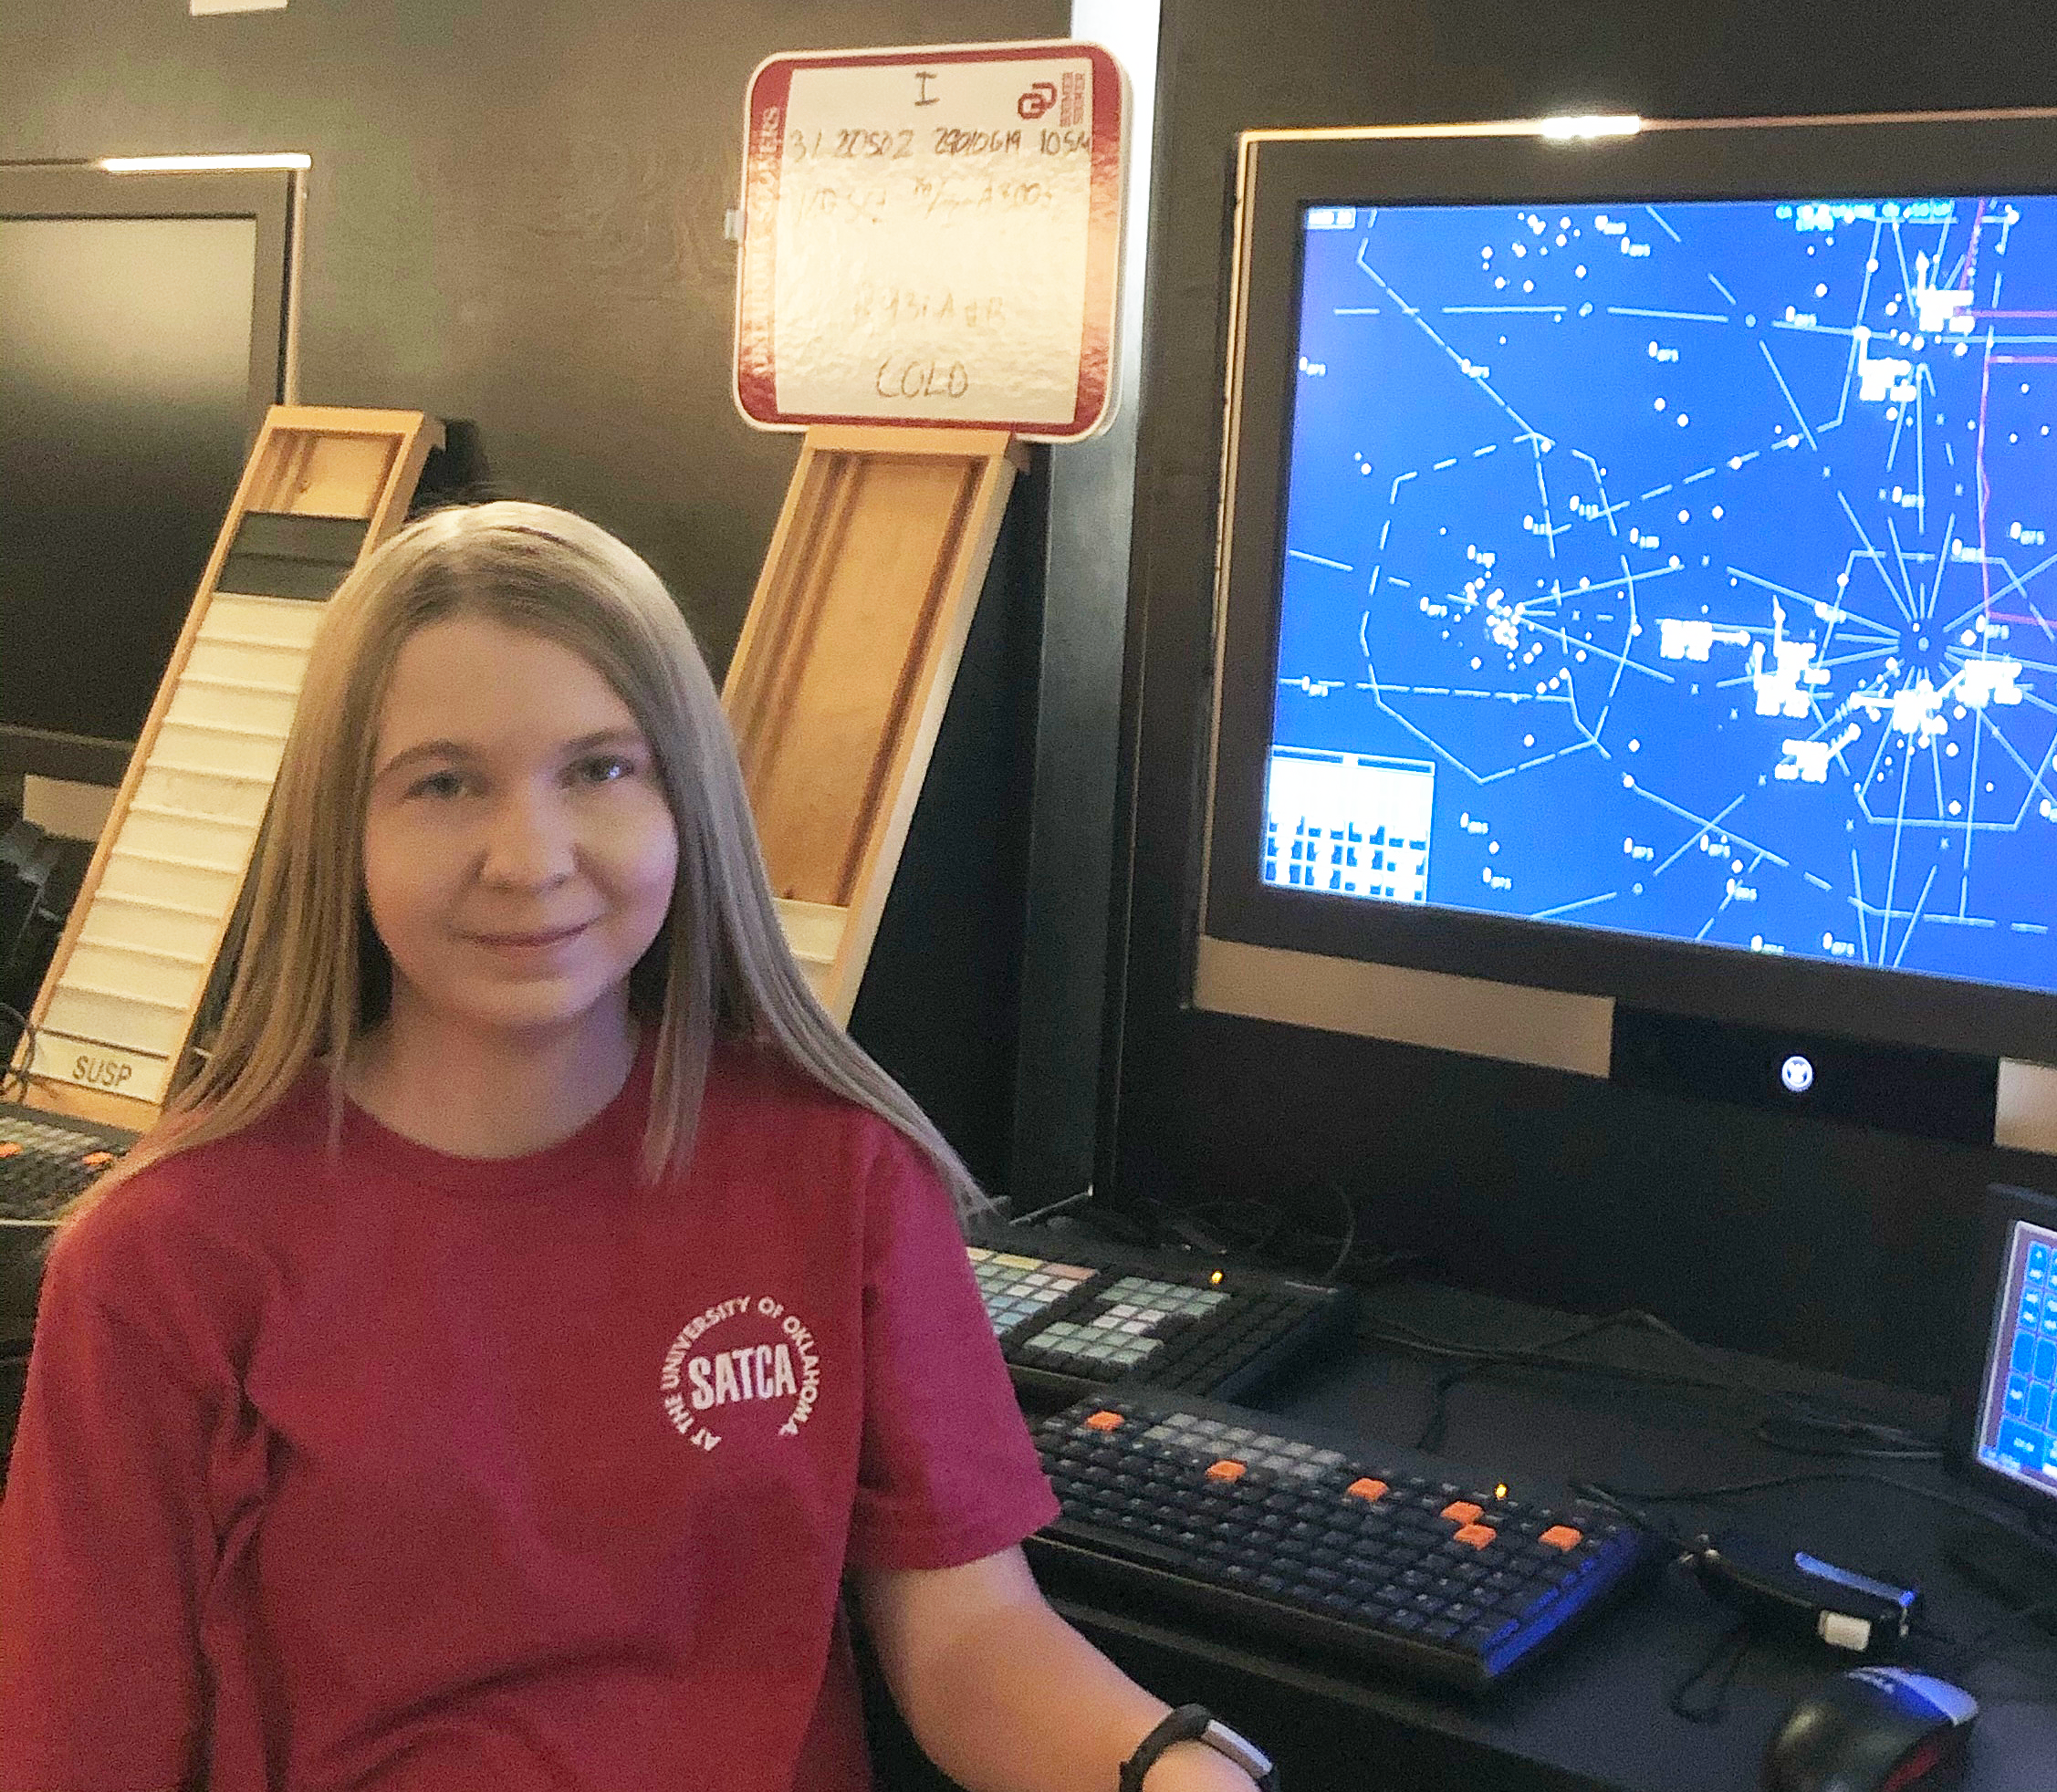 Taylor Shannon sitting in front of a computer screen with an Air traffic simulation running.